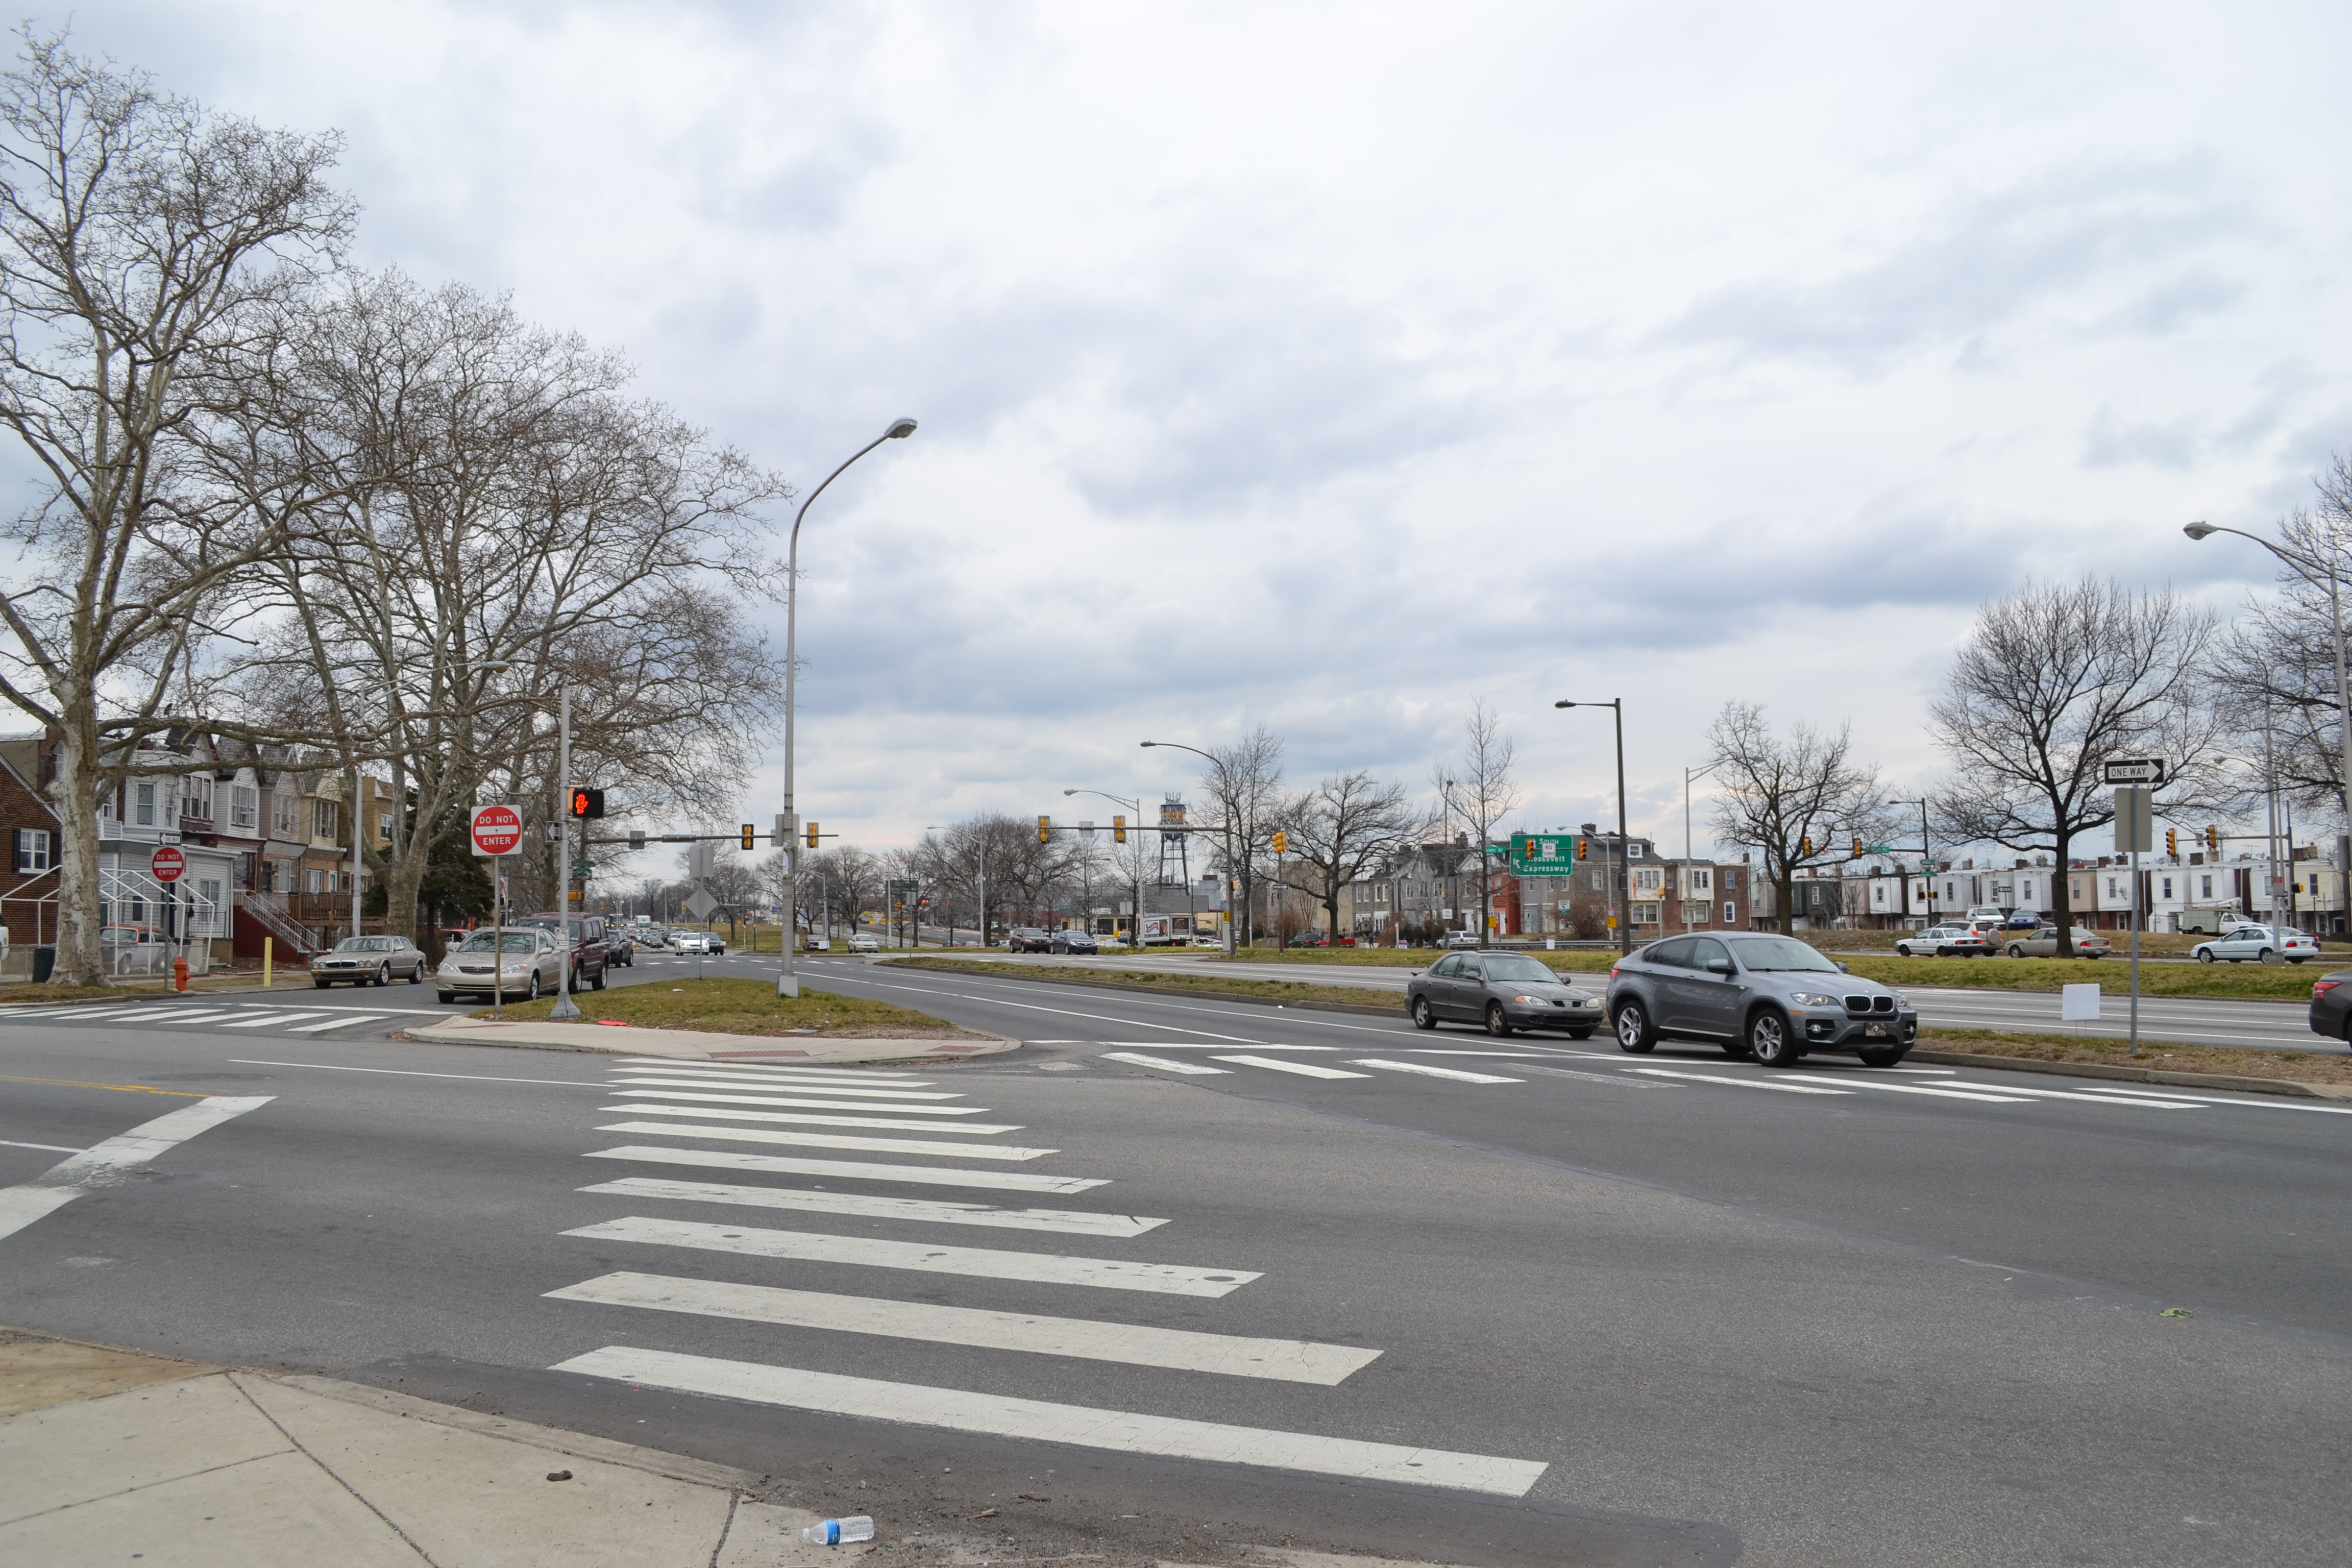 Roosevelt Boulevard's width makes it difficult to cross on foot